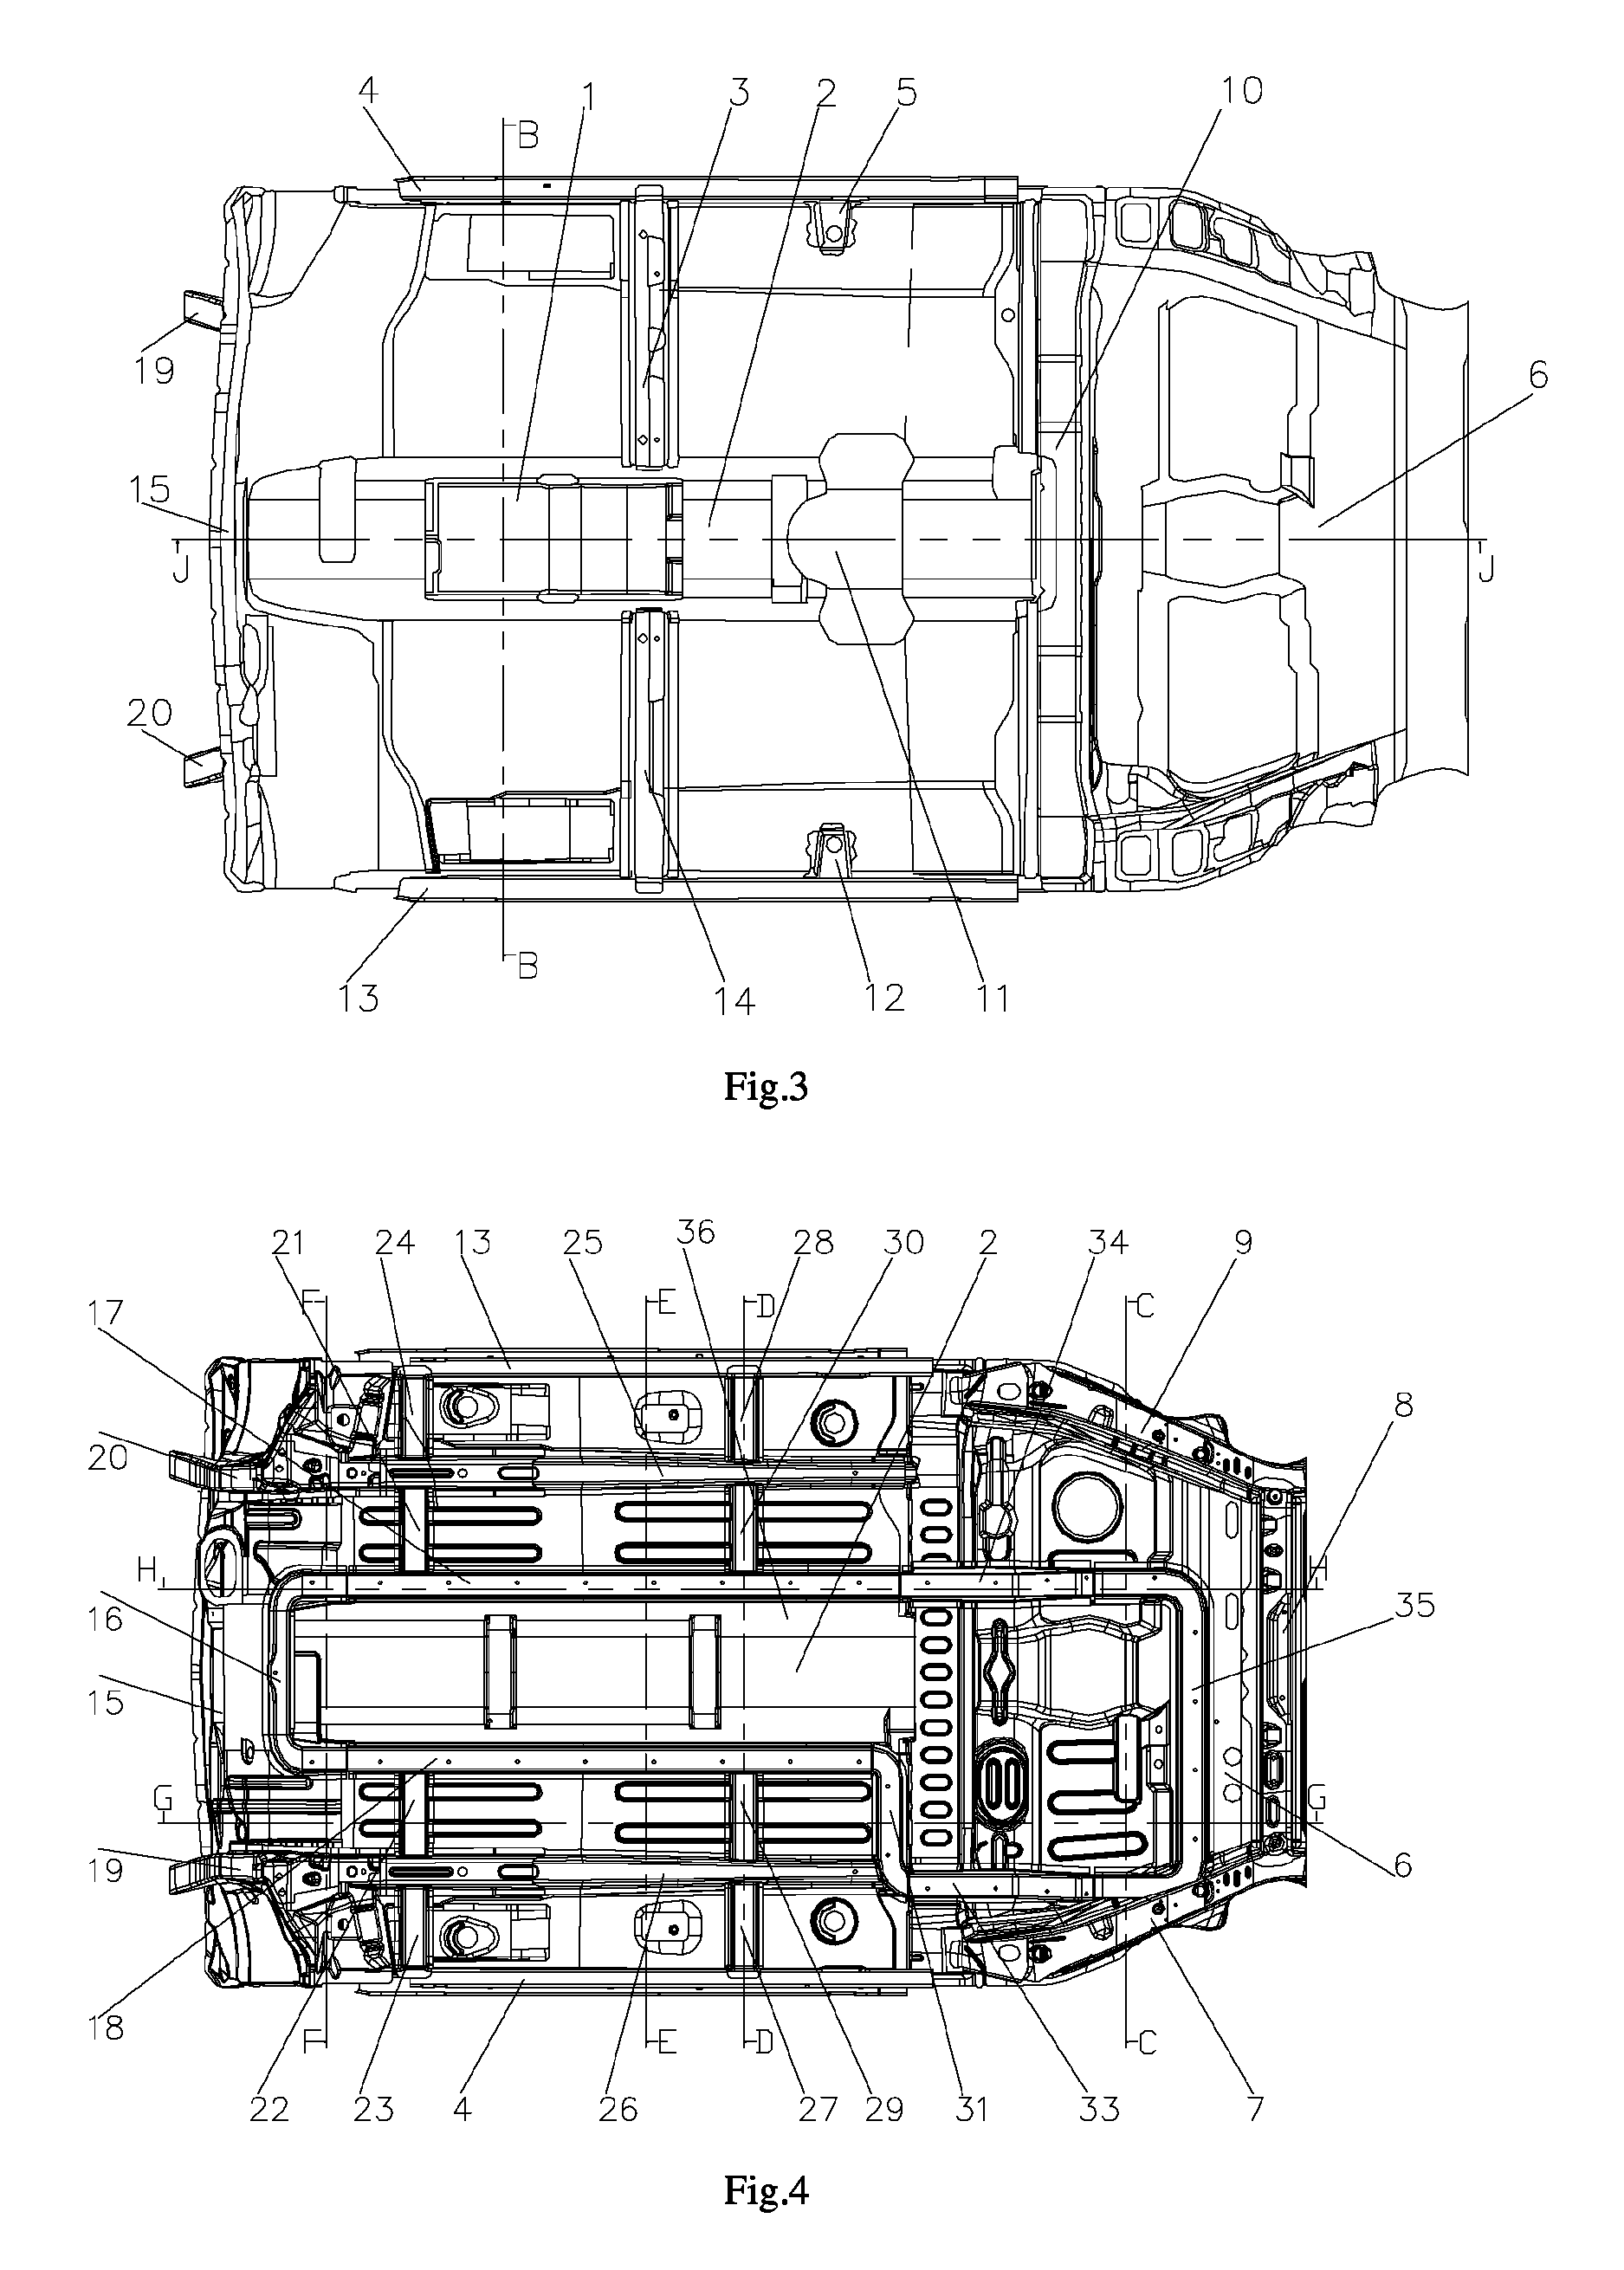 Floorboard assembly for vehicle